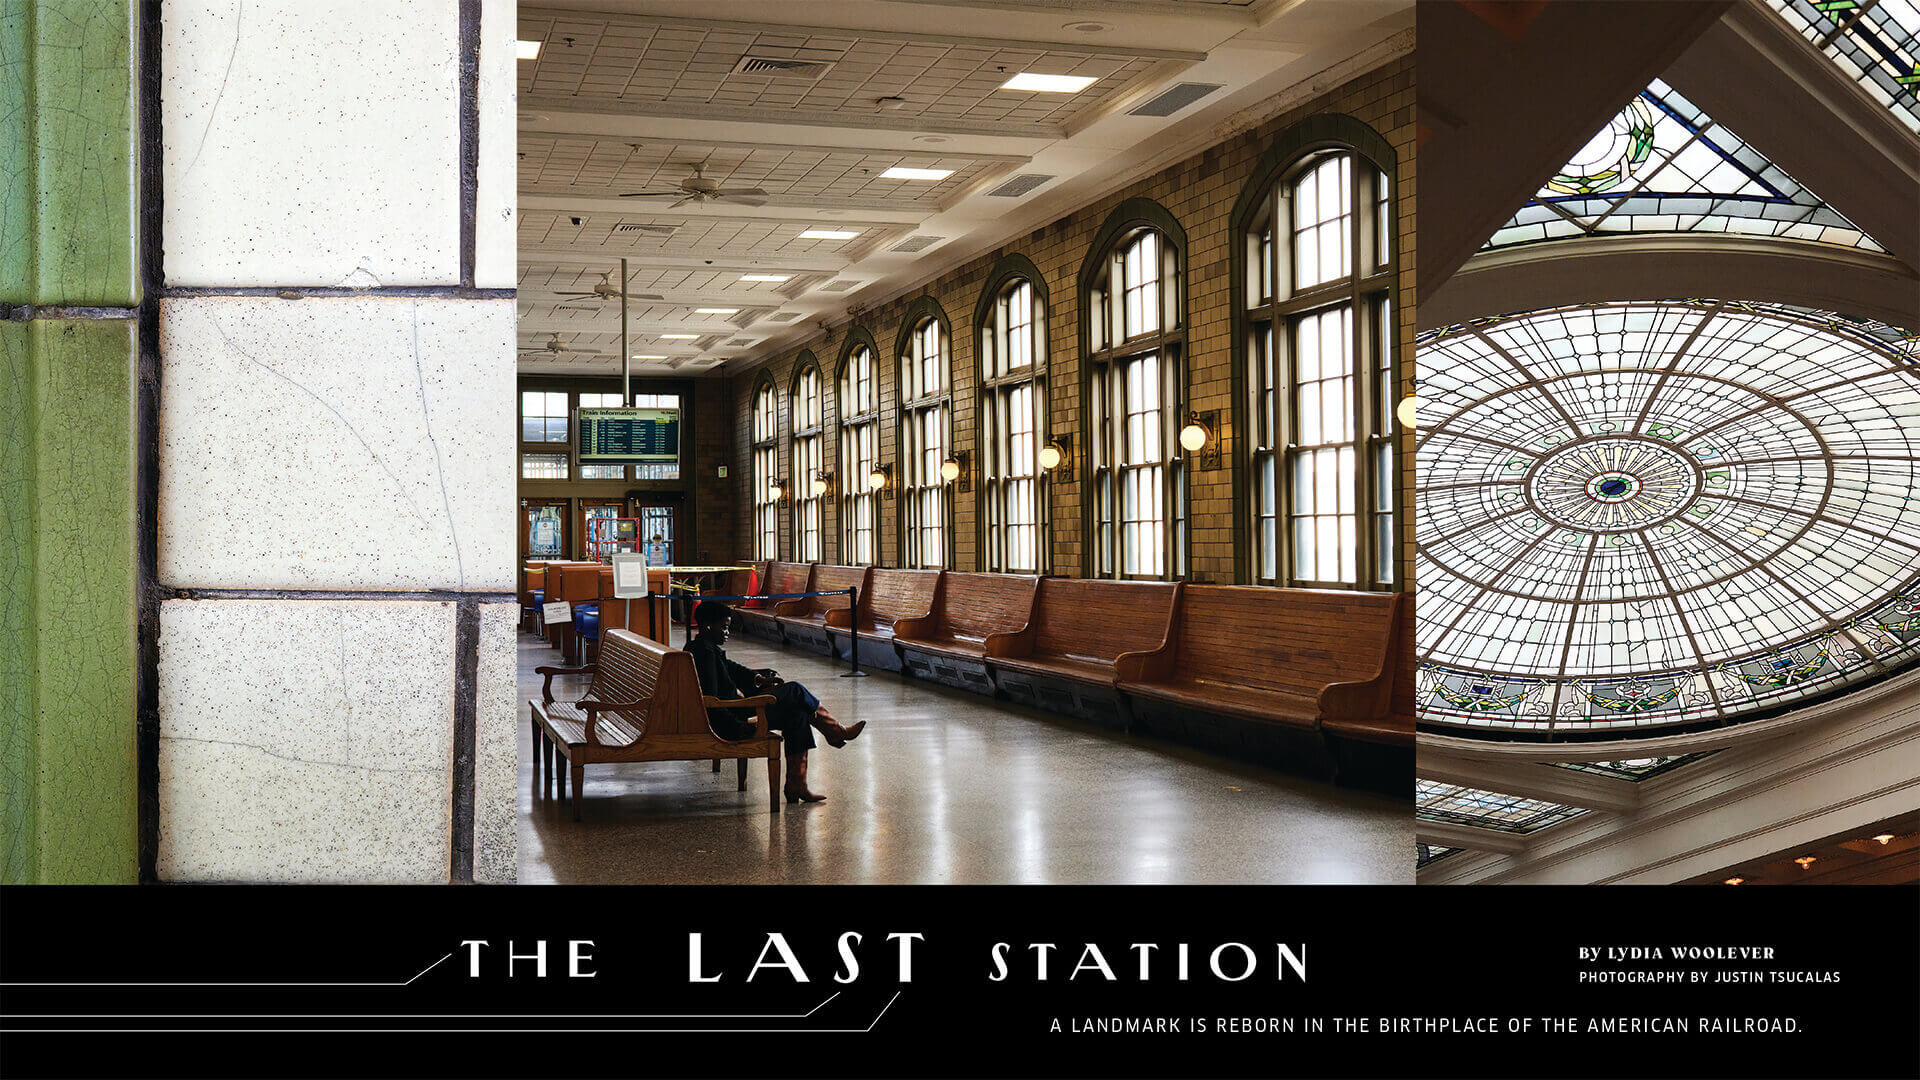 Penn Station is Once Again on the Verge of Rebirth. Will It